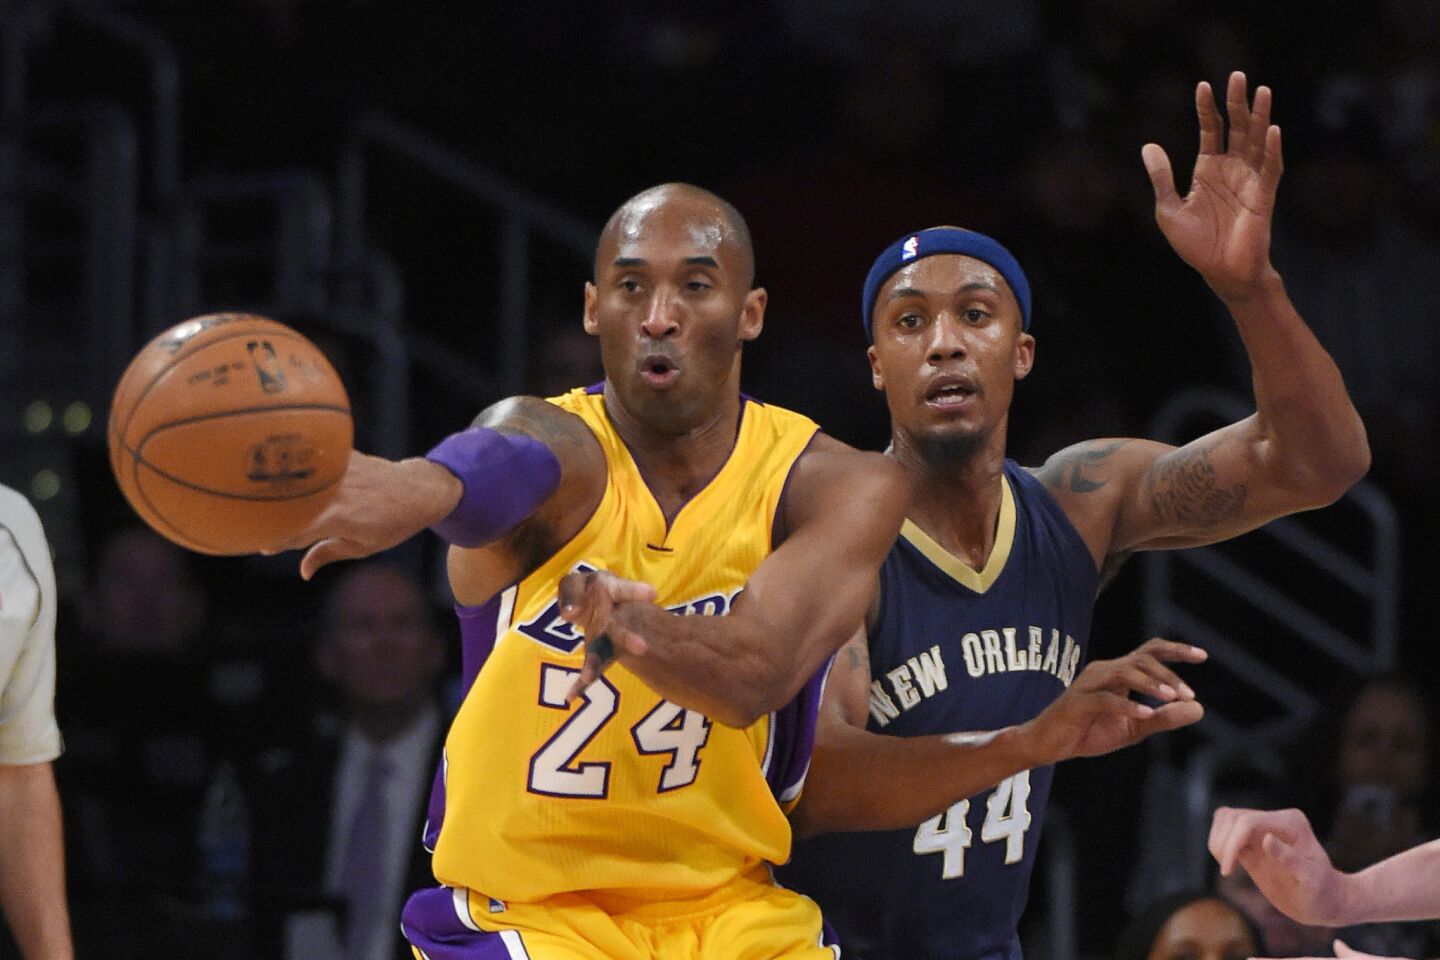 Lakers get a rare victory but still suffer a loss as Kobe Bryant exits early with an injury